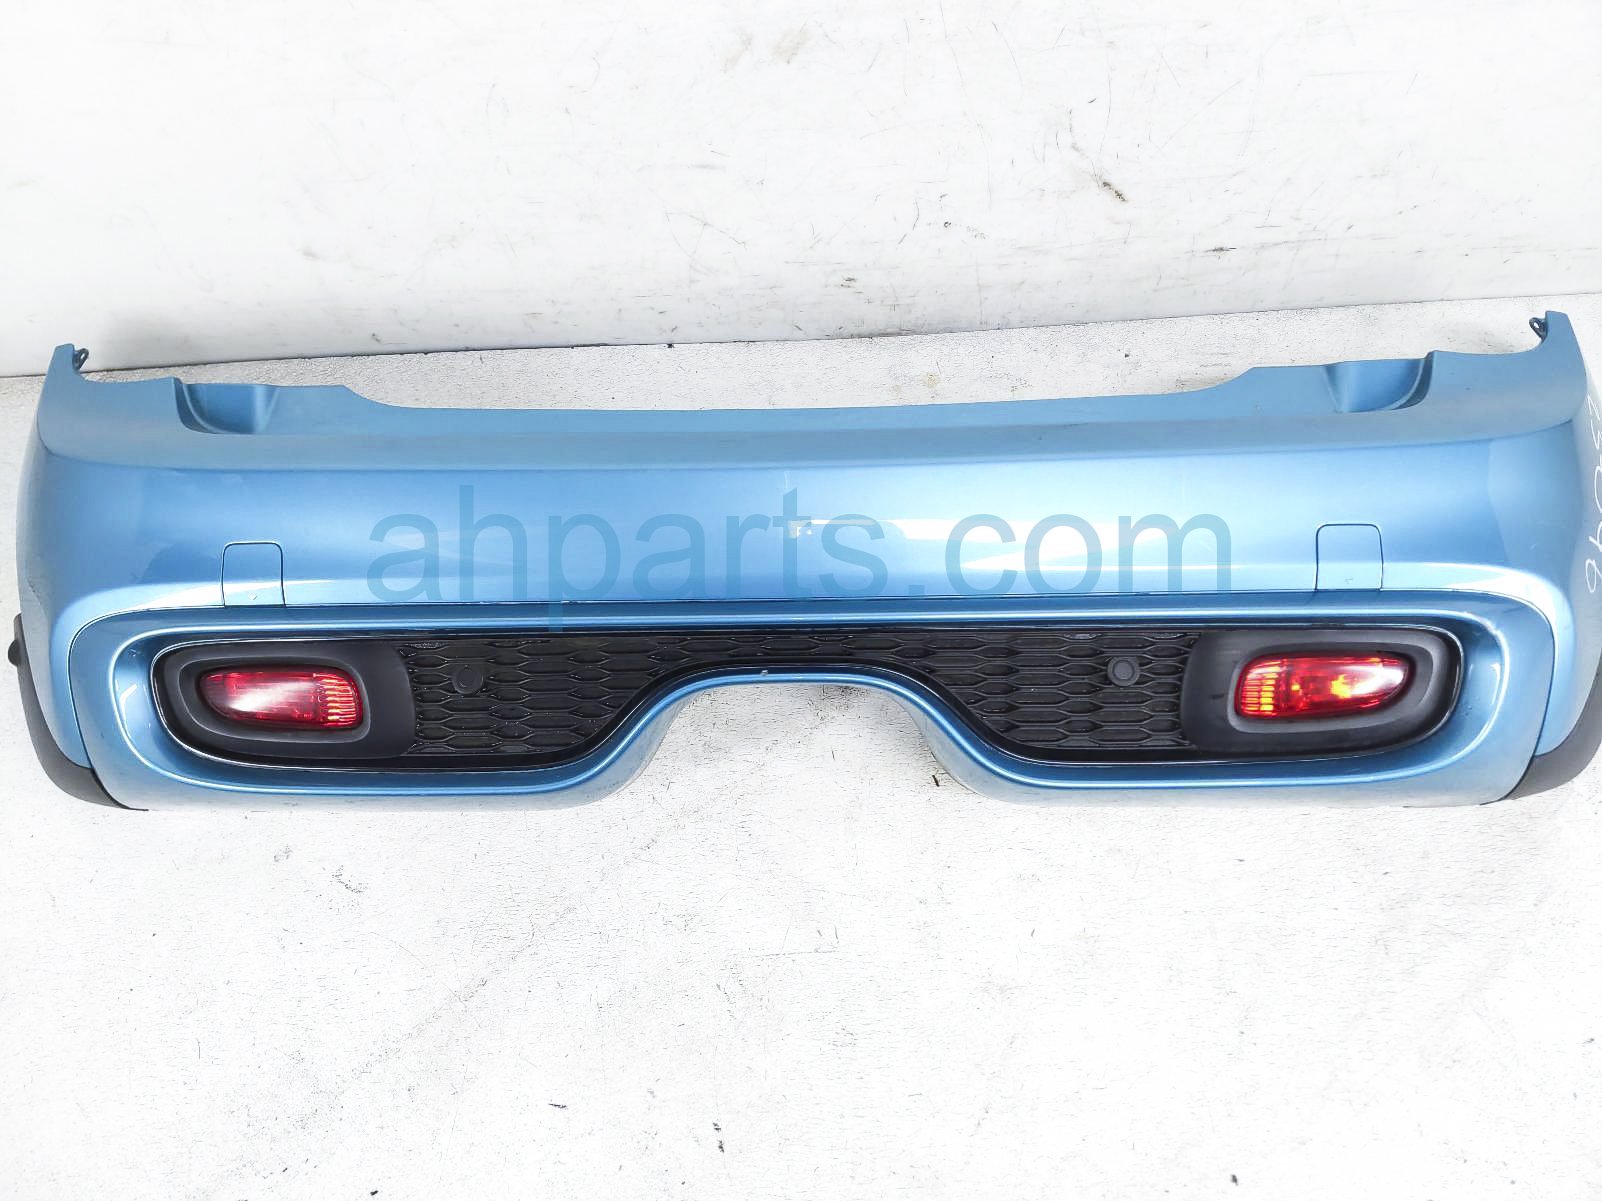 $249 BMW REAR BUMPER COVER - TEAL - NOTES